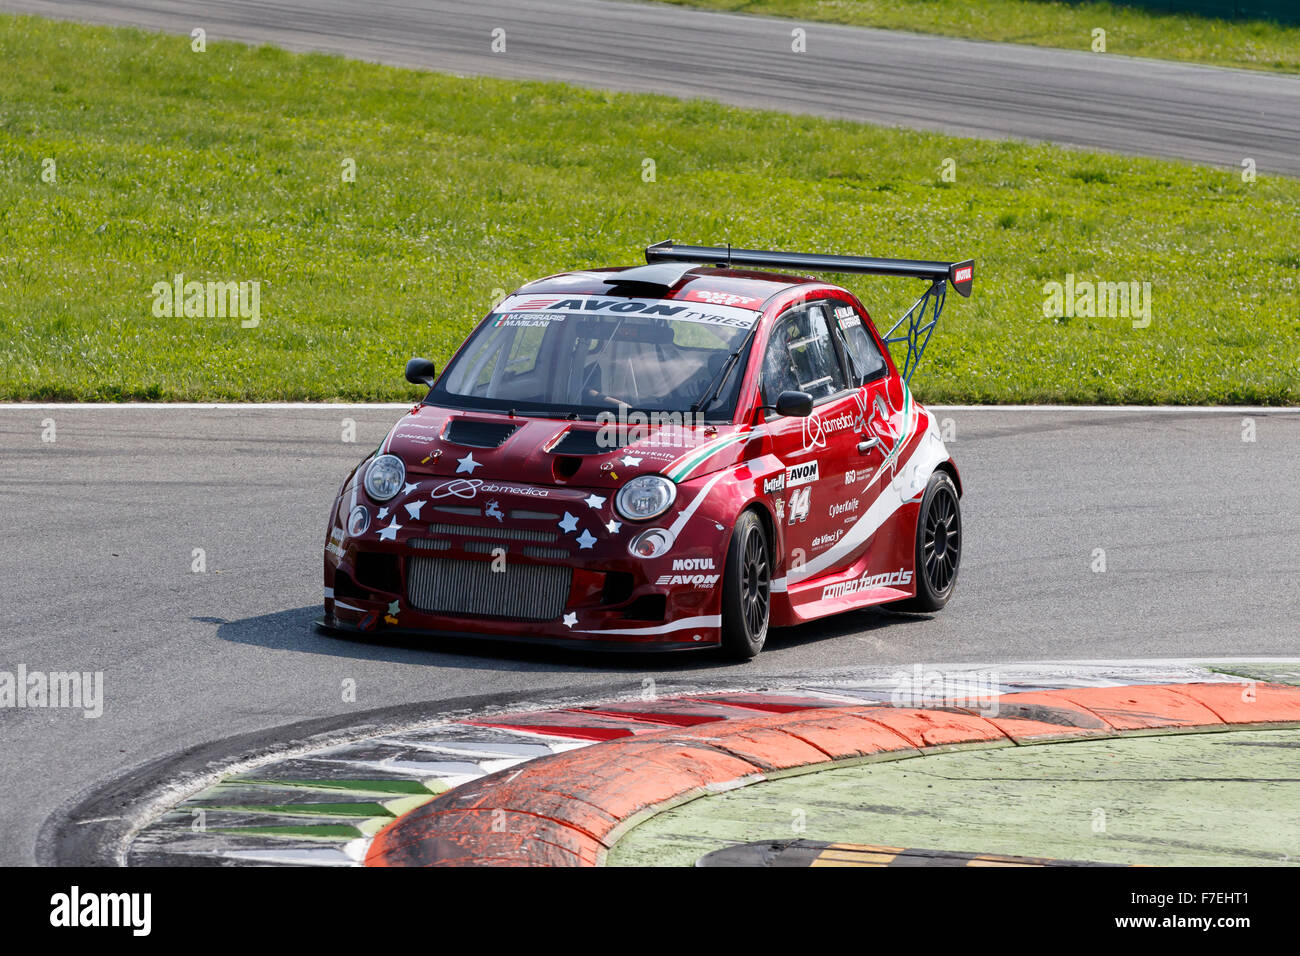 Monza, Italy - May 30, 2015: Fiat 500 Abarth of ROMEO FERRARIS team, driven by MILANI Matteo - FERRARIS Mario during the C.I. Turismo Endurance - Race in Autodromo Nazionale di Monza Circuit on May 30, 2015 in Monza, Italy. Stock Photo